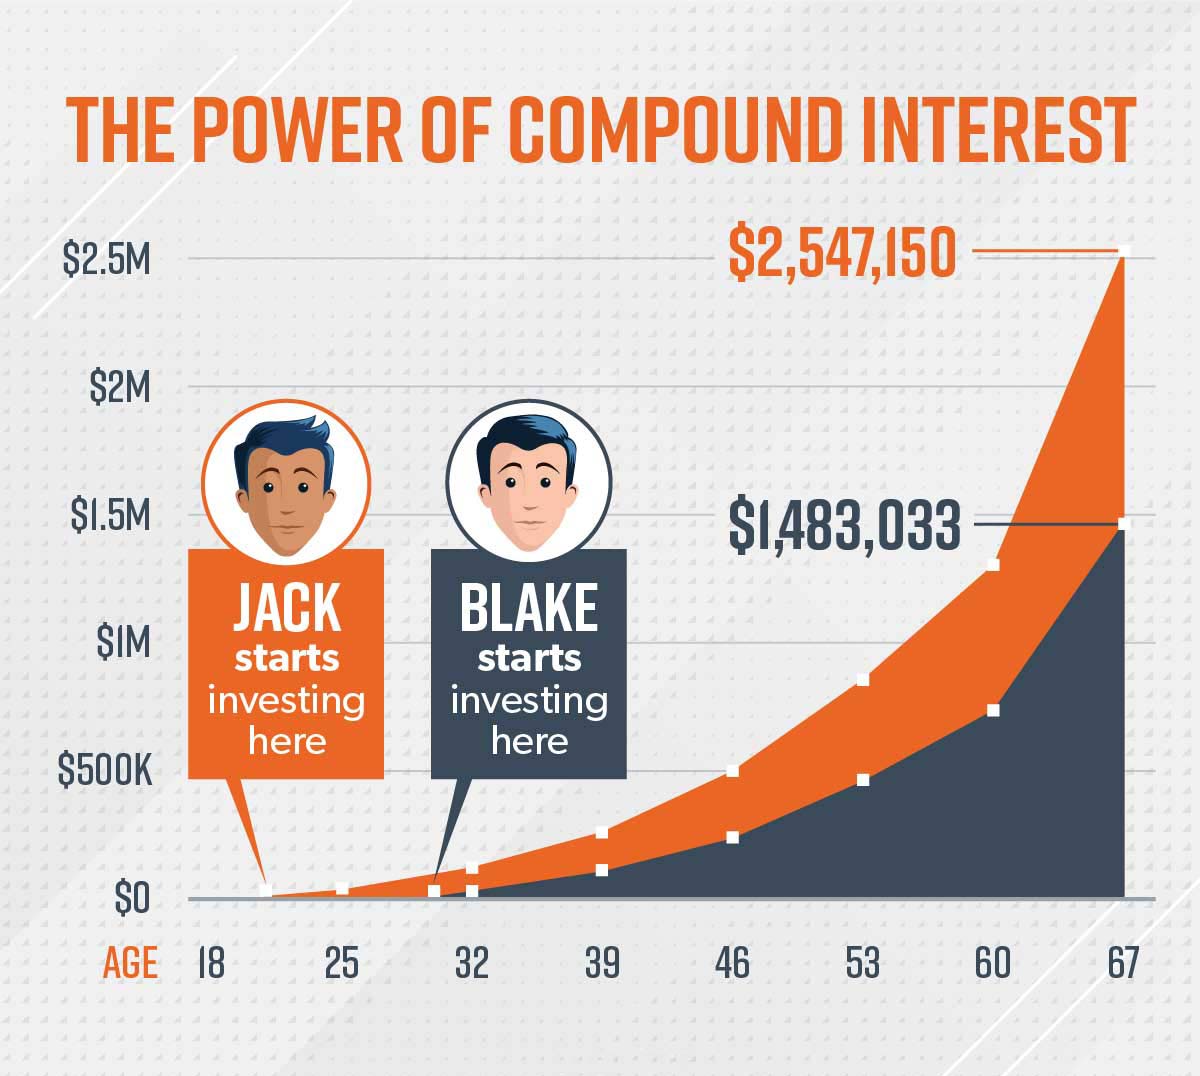 The power of compound interest graph